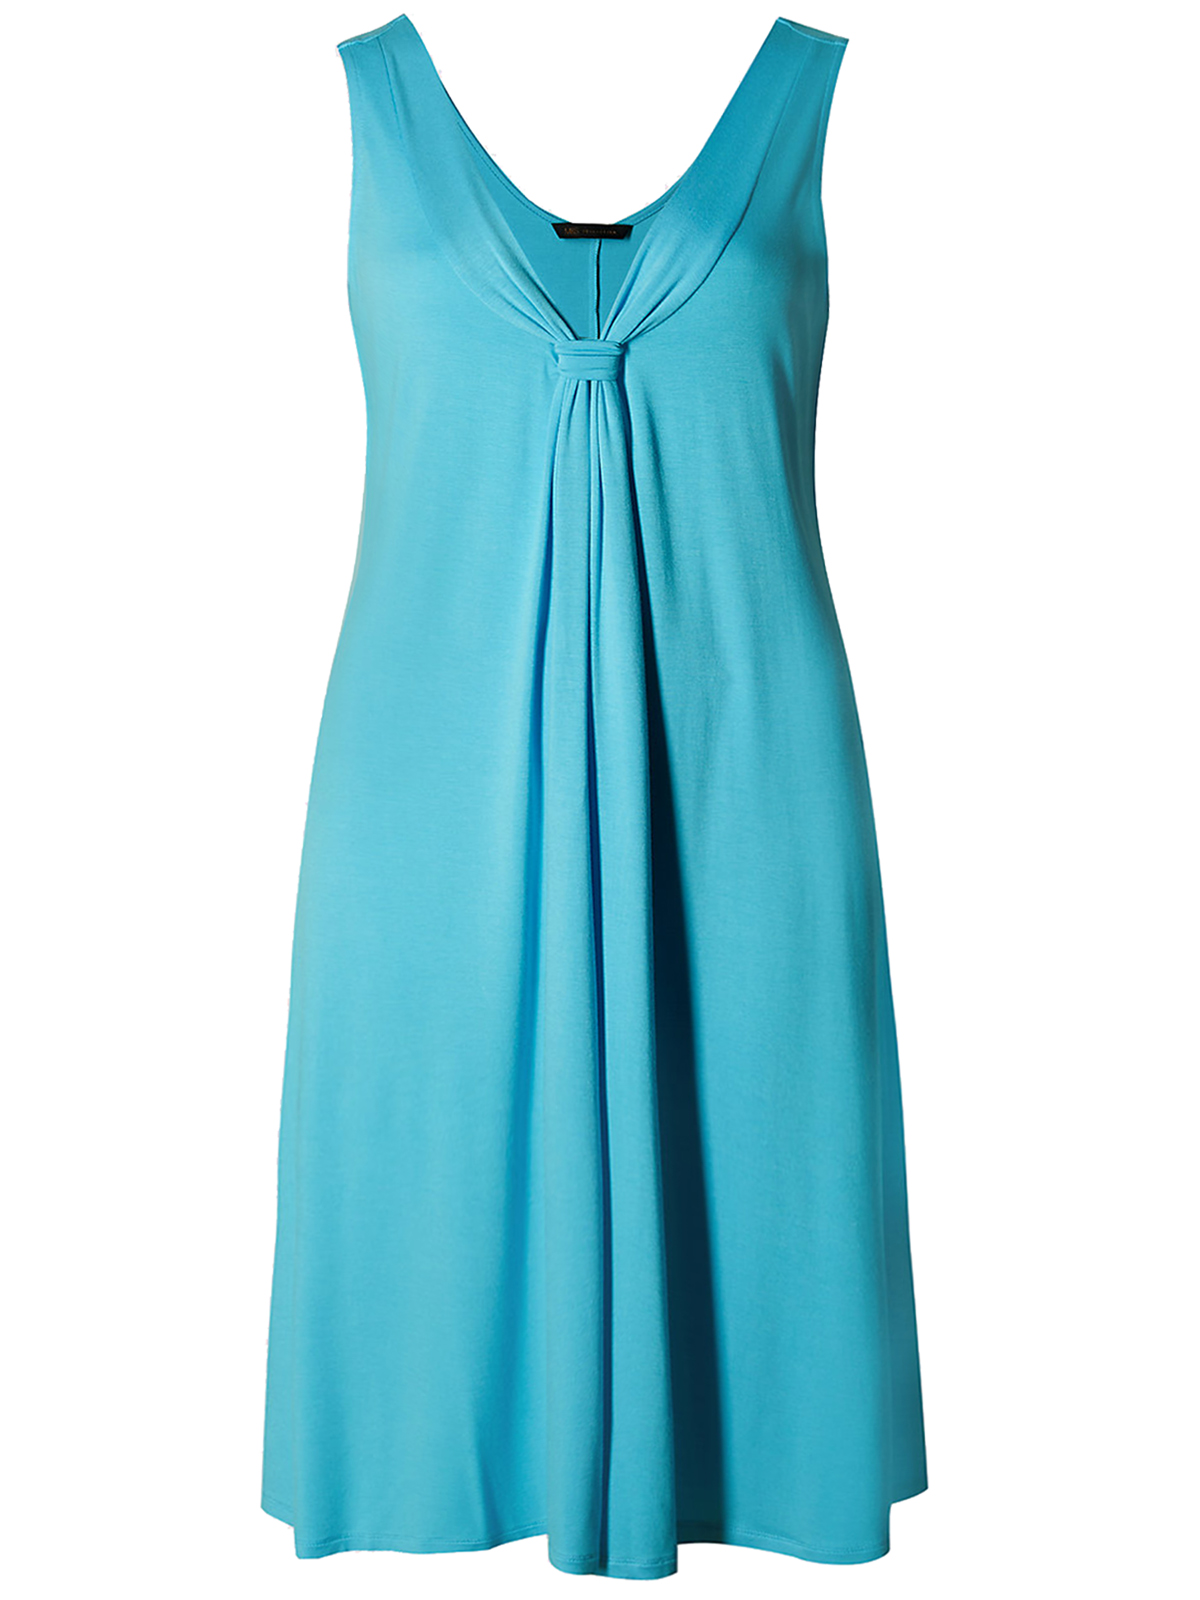 Marks and Spencer - - M&5 TURQUOISE Cool Comfort V-Neck Jersey Sun ...